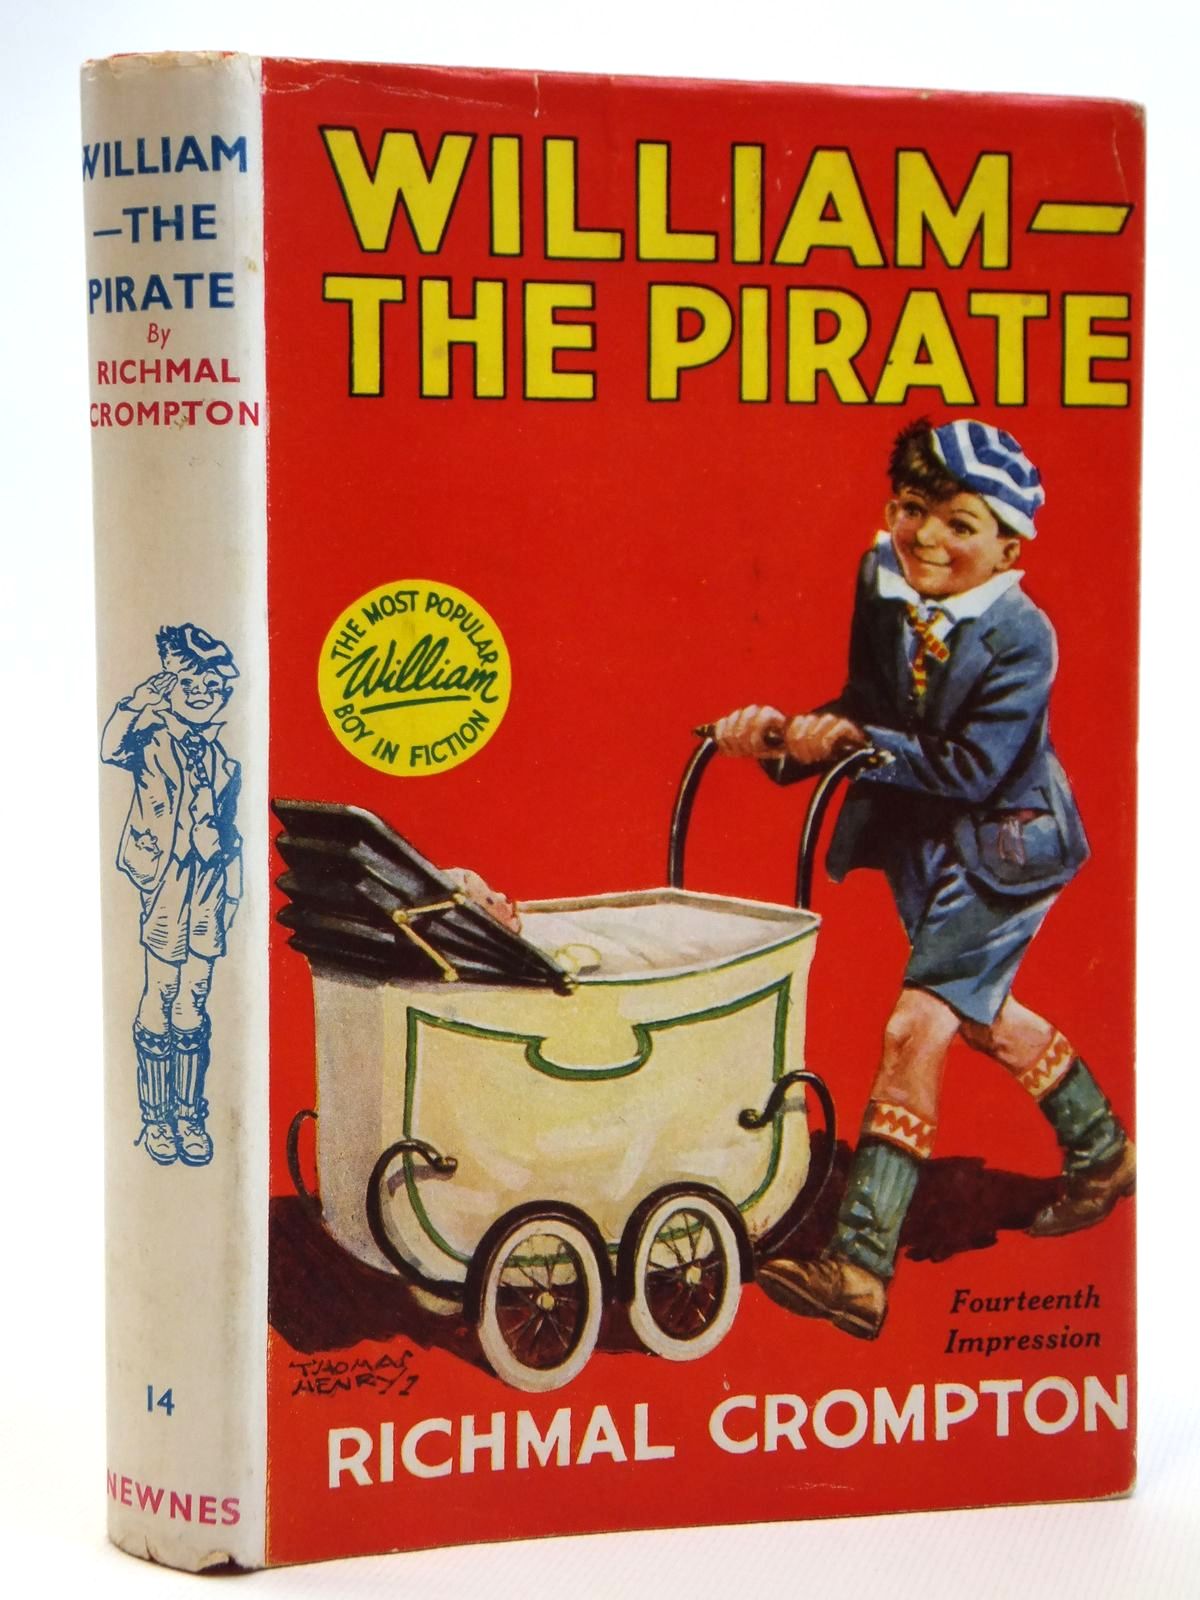 Cover of WILLIAM THE PIRATE by Richmal Crompton